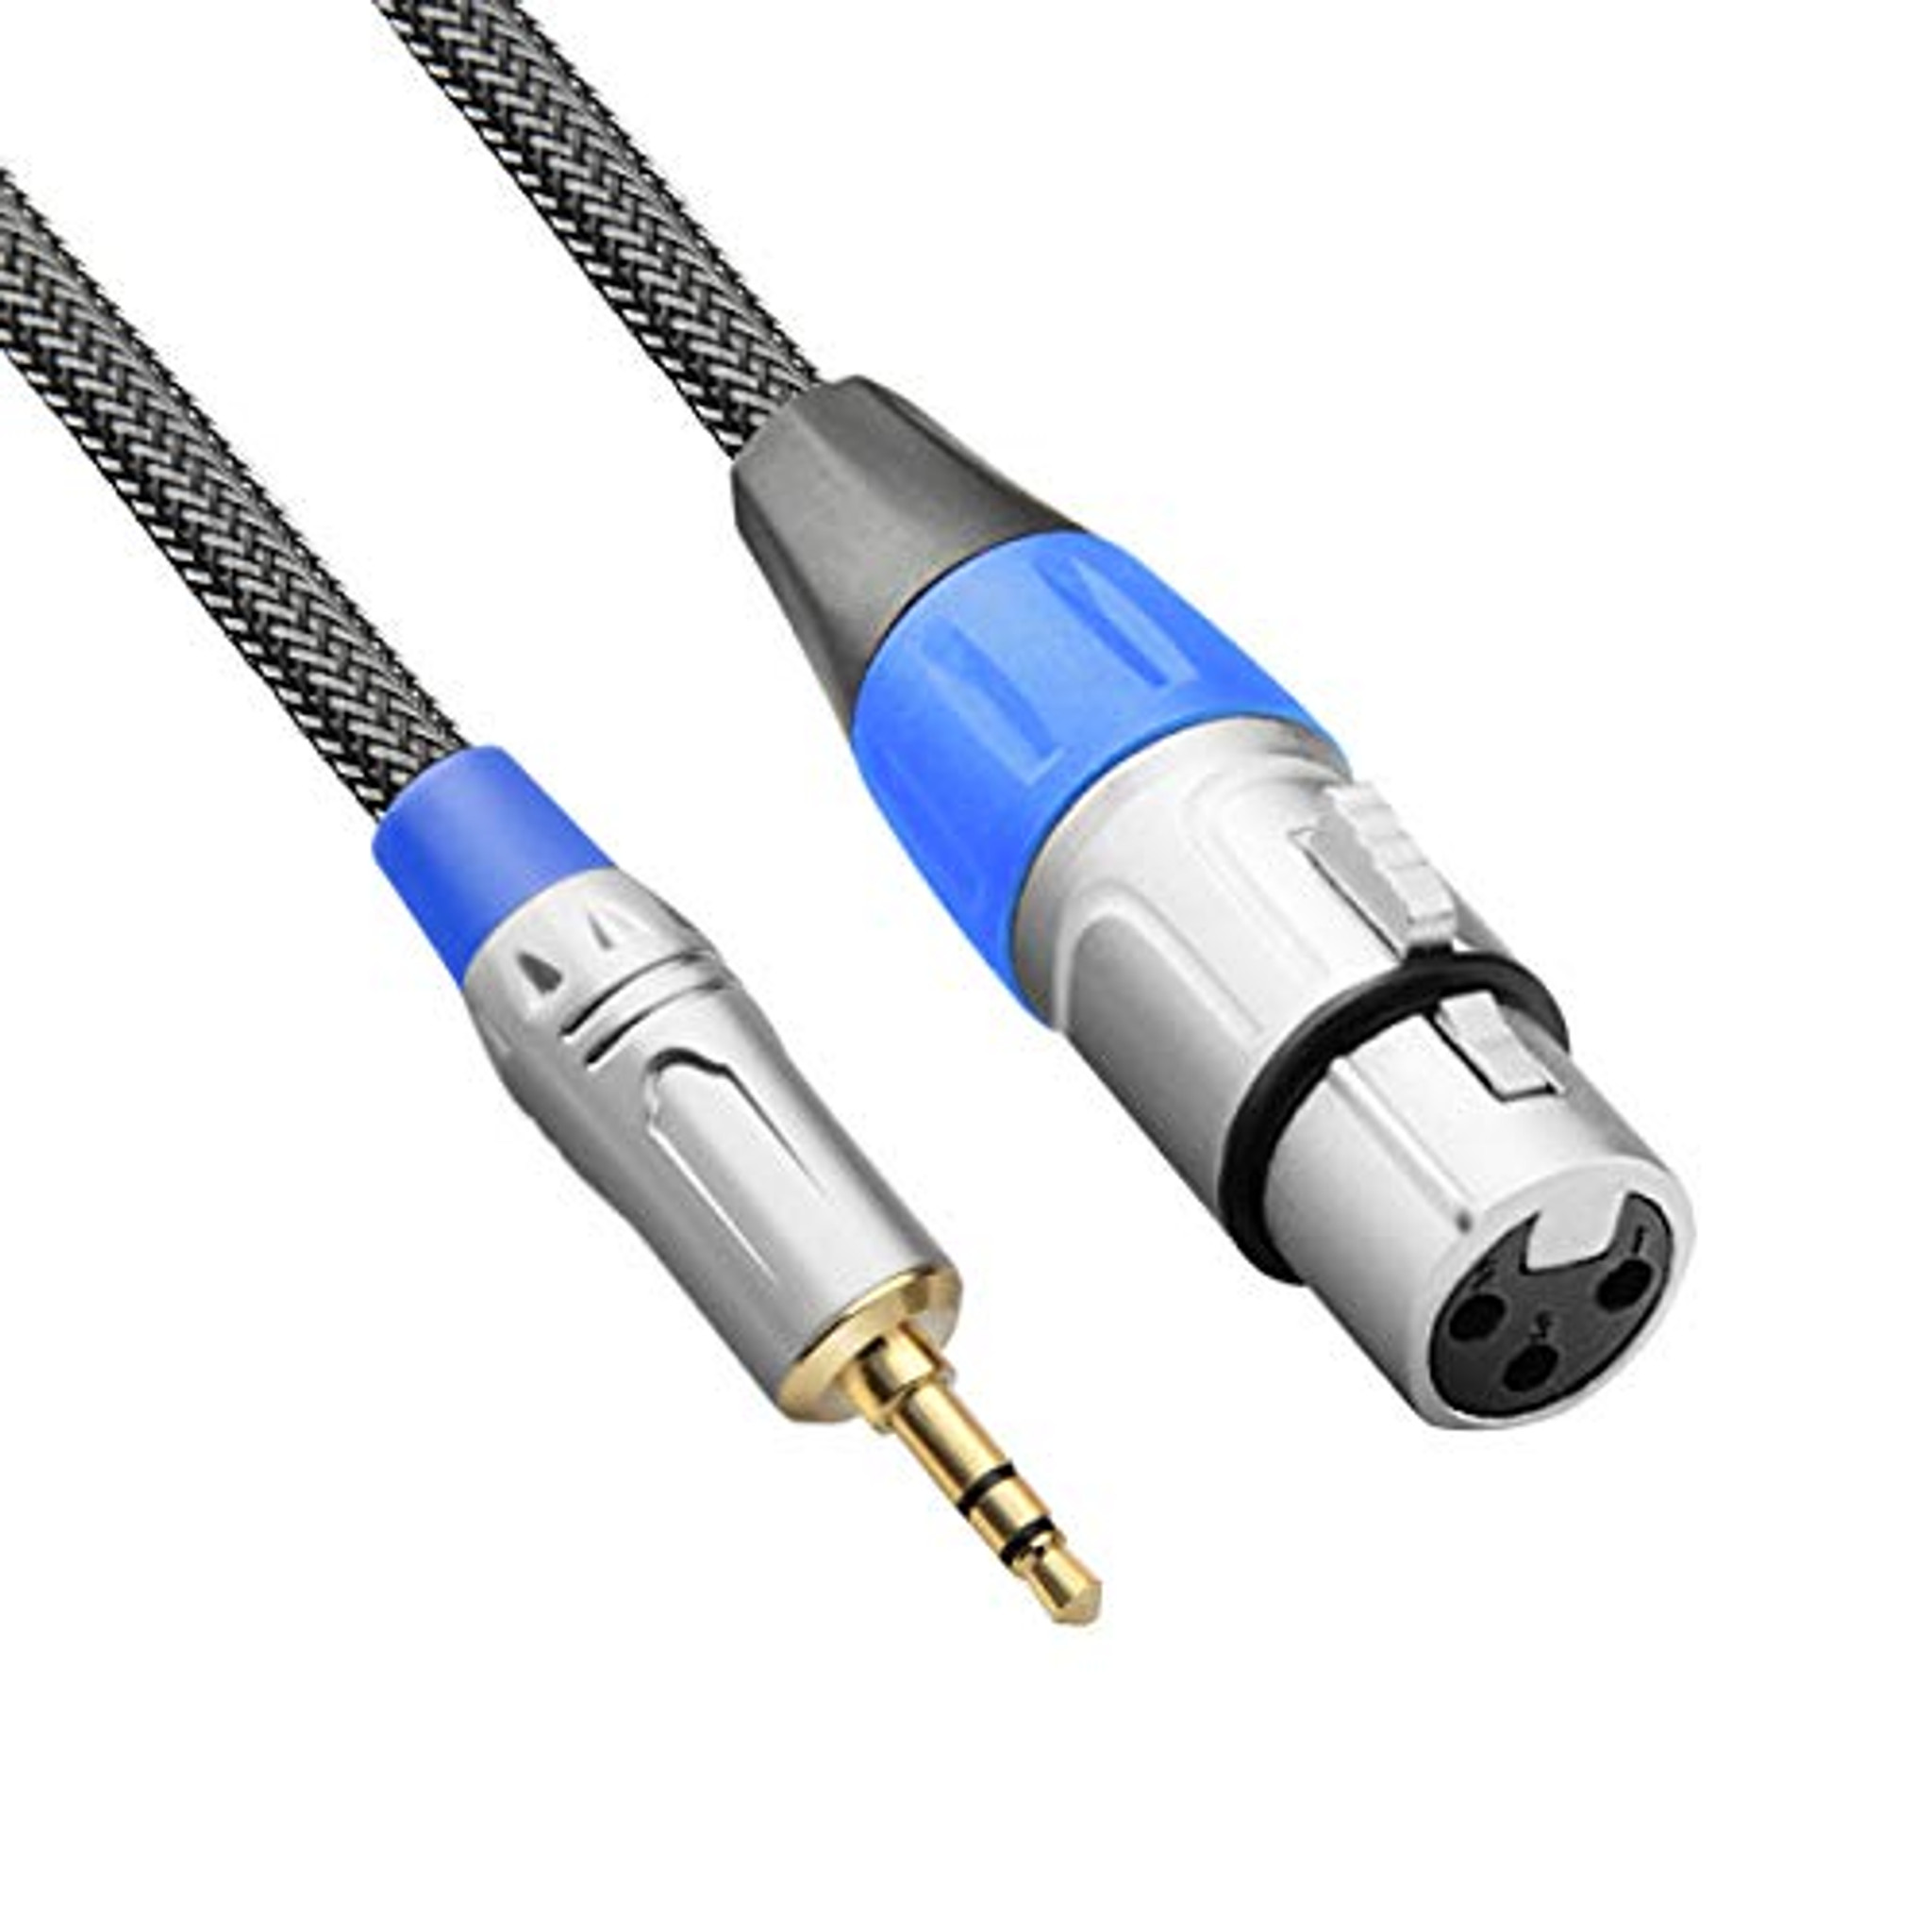 XLR Female to TRS Male Microphone Cable — AMERICAN RECORDER TECHNOLOGIES,  INC.